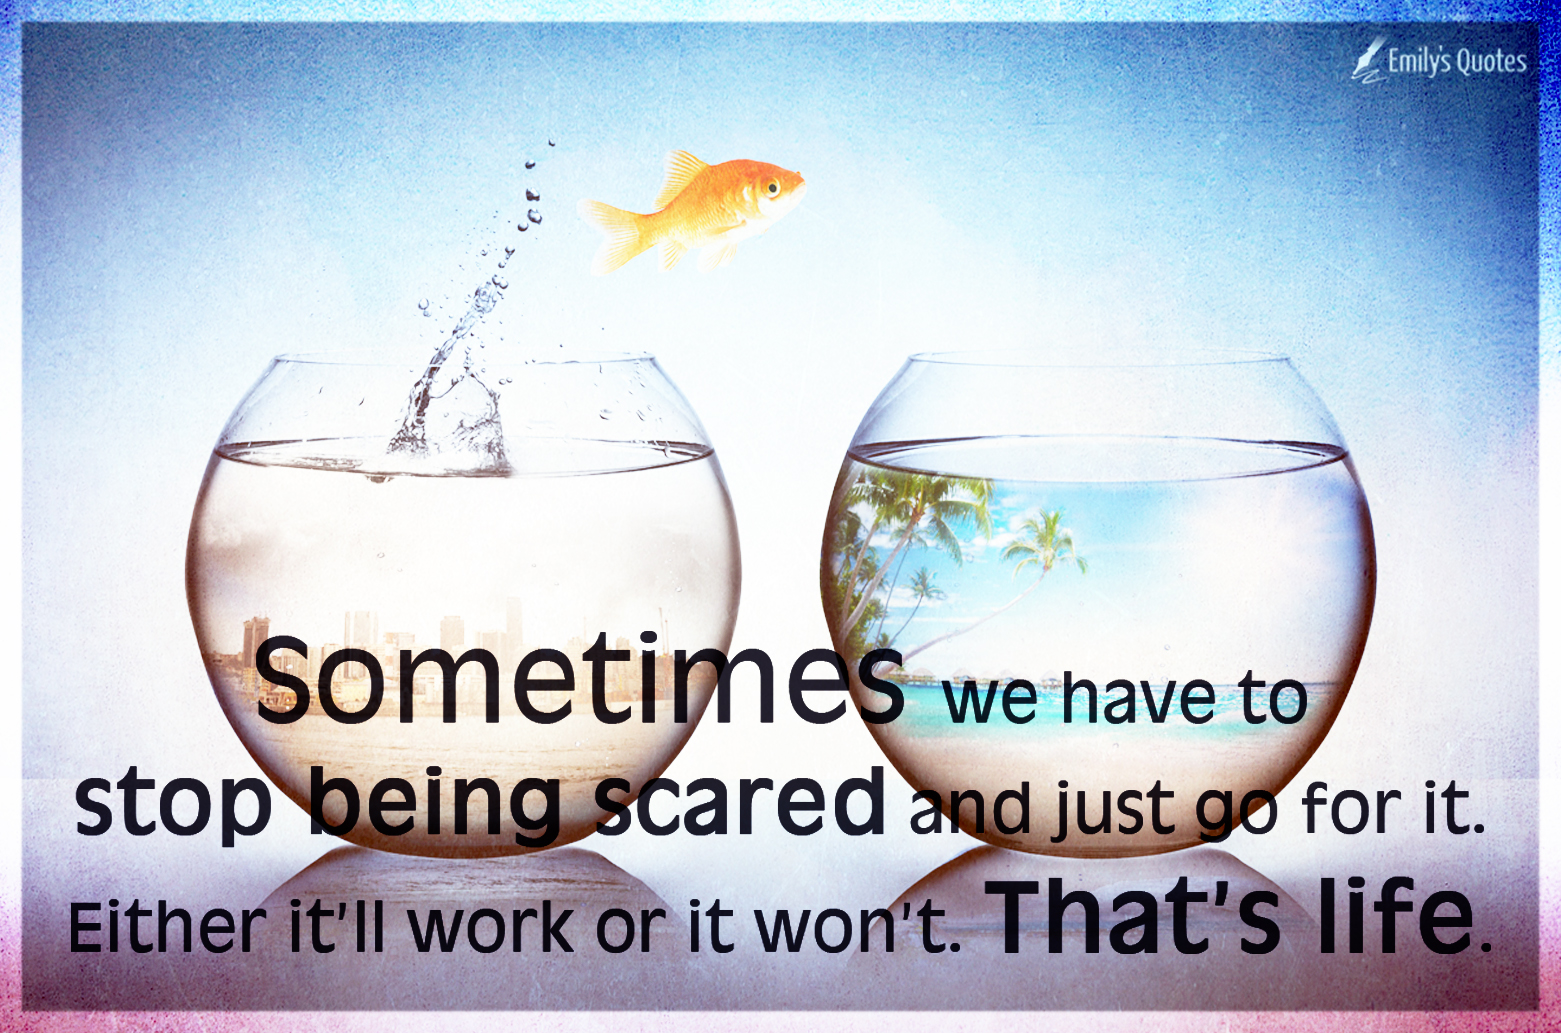 Sometimes we have to stop being scared and just go for it. Either it’ll work or it won’t